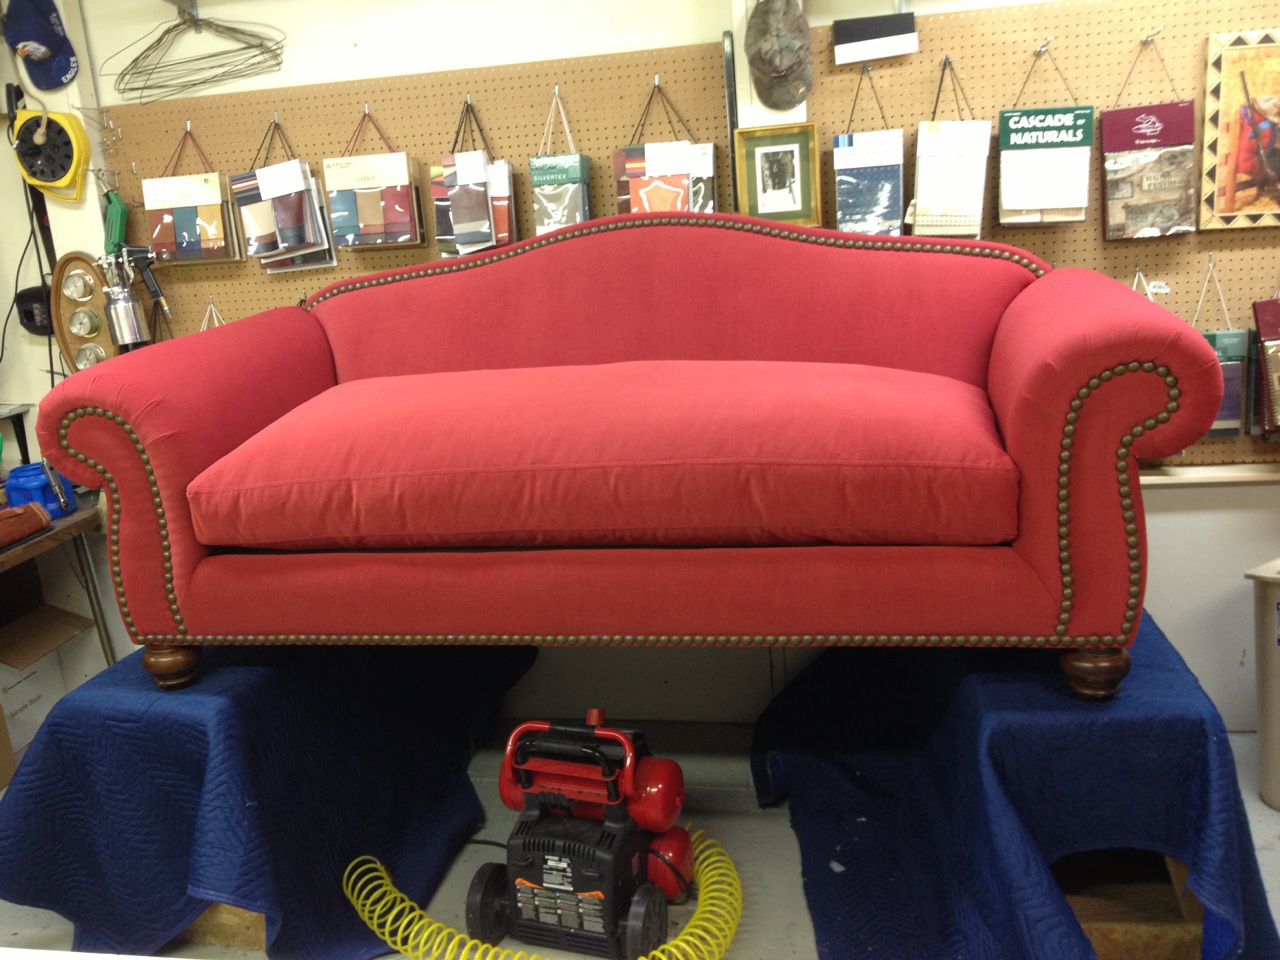 This red sofa featured decorative tacks. Although more meticulous work, the end result makes a statement.